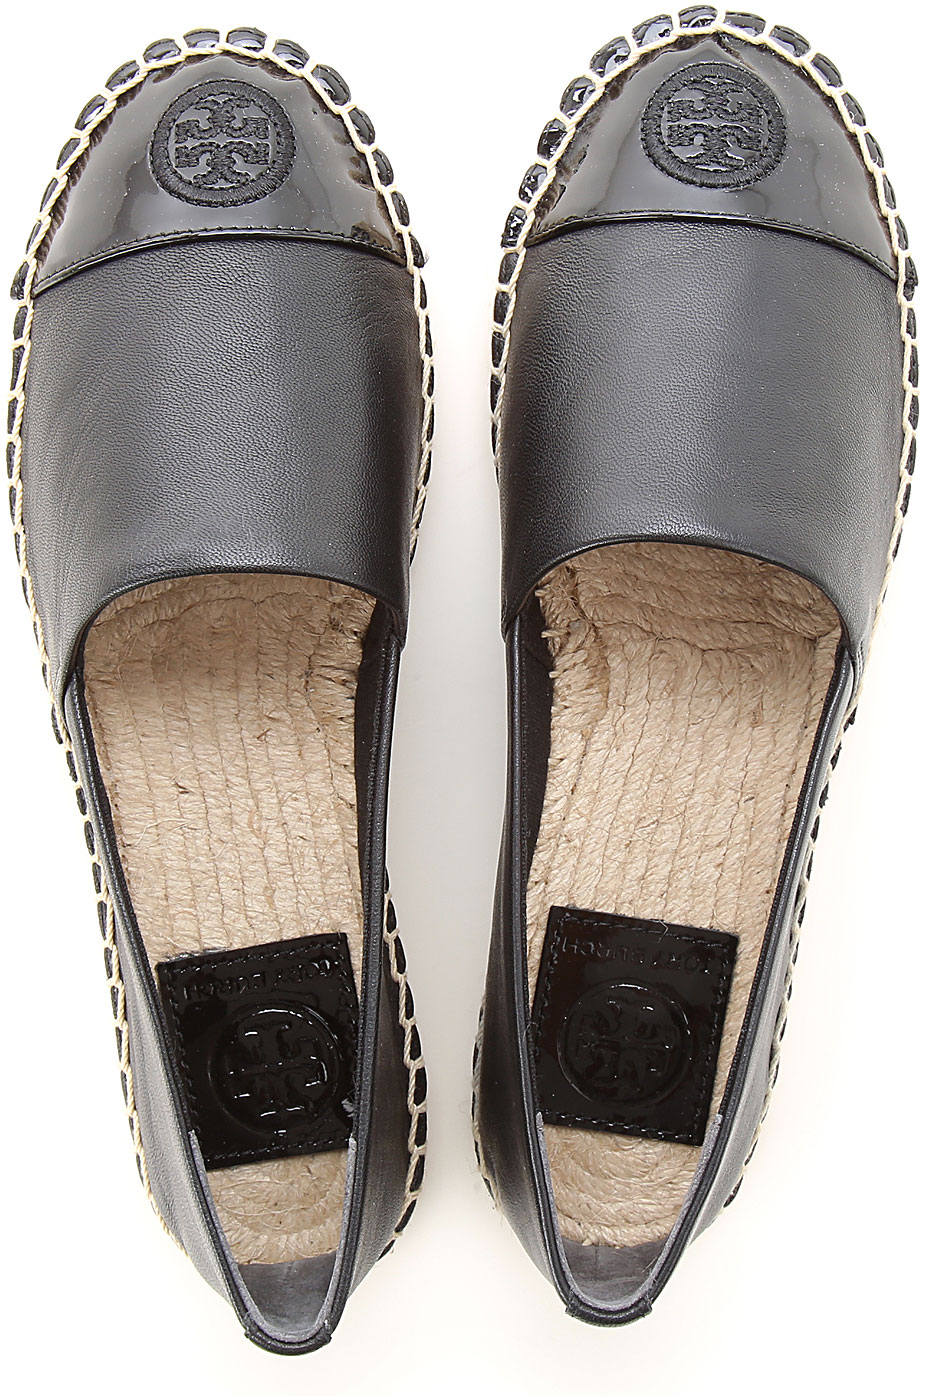 Womens Shoes Tory Burch, Style code: 61194-perfectblk-